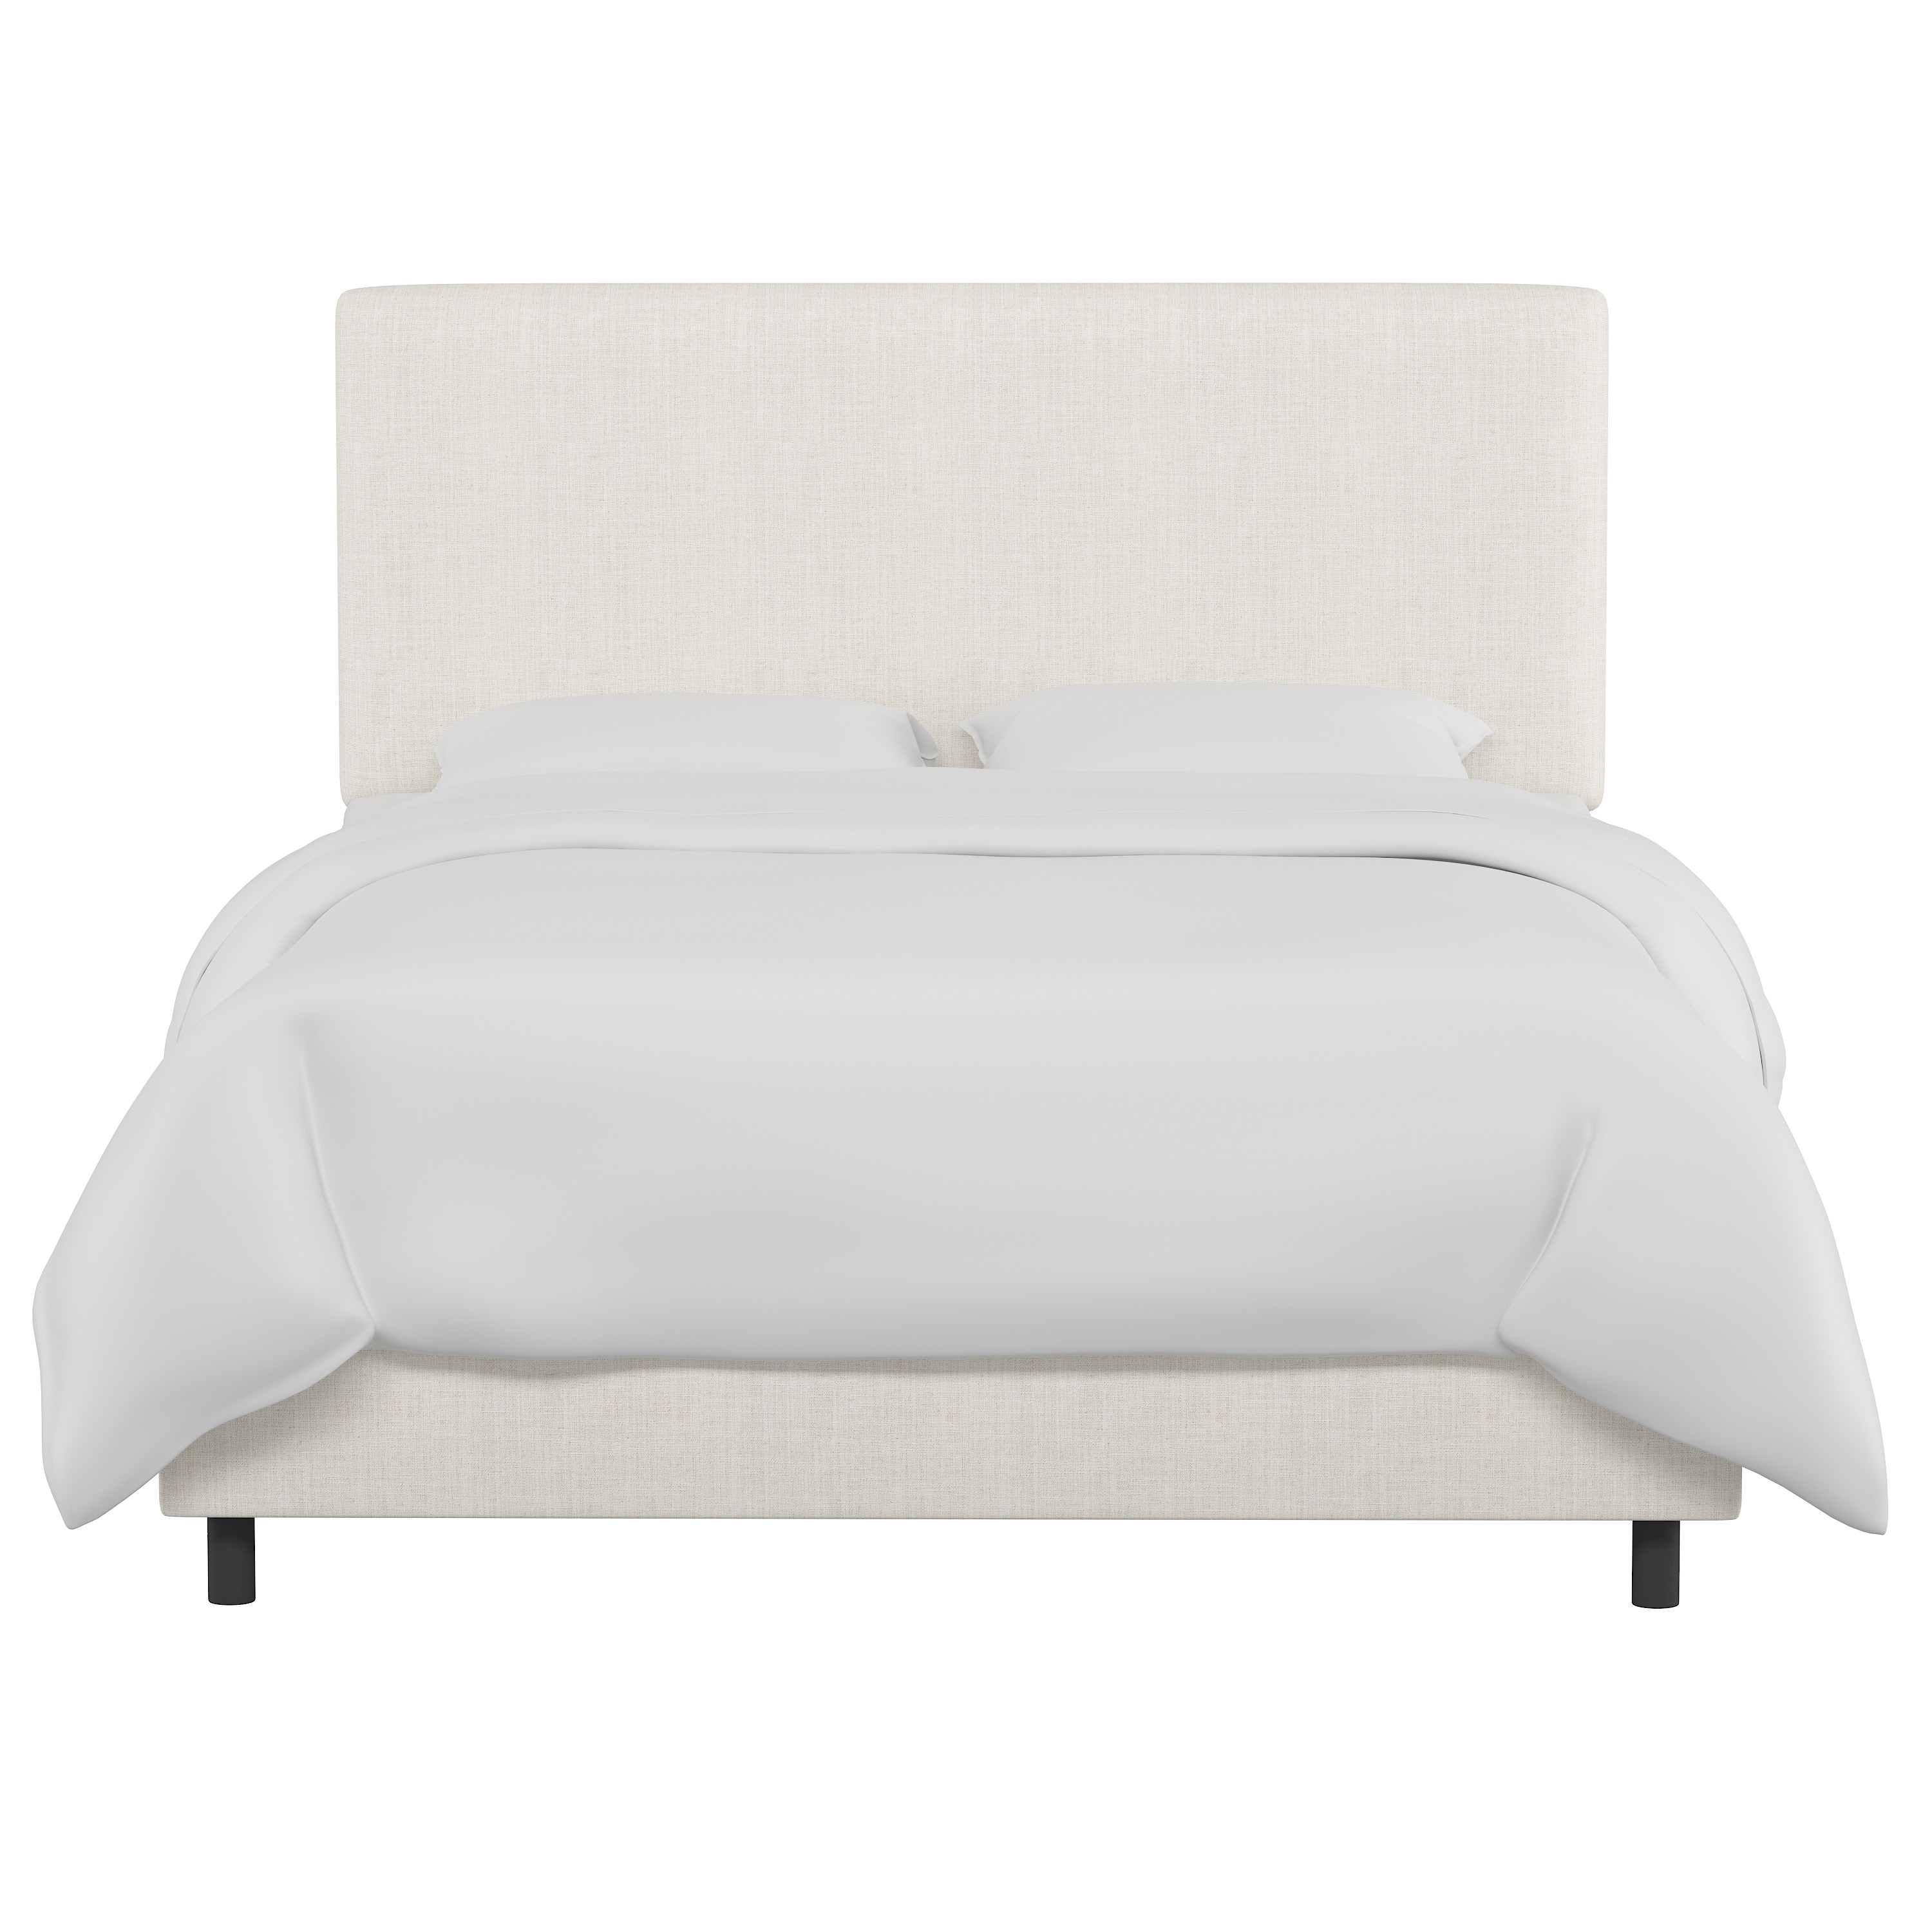 Twin Sawyer Bed in Linen Talc - Image 1